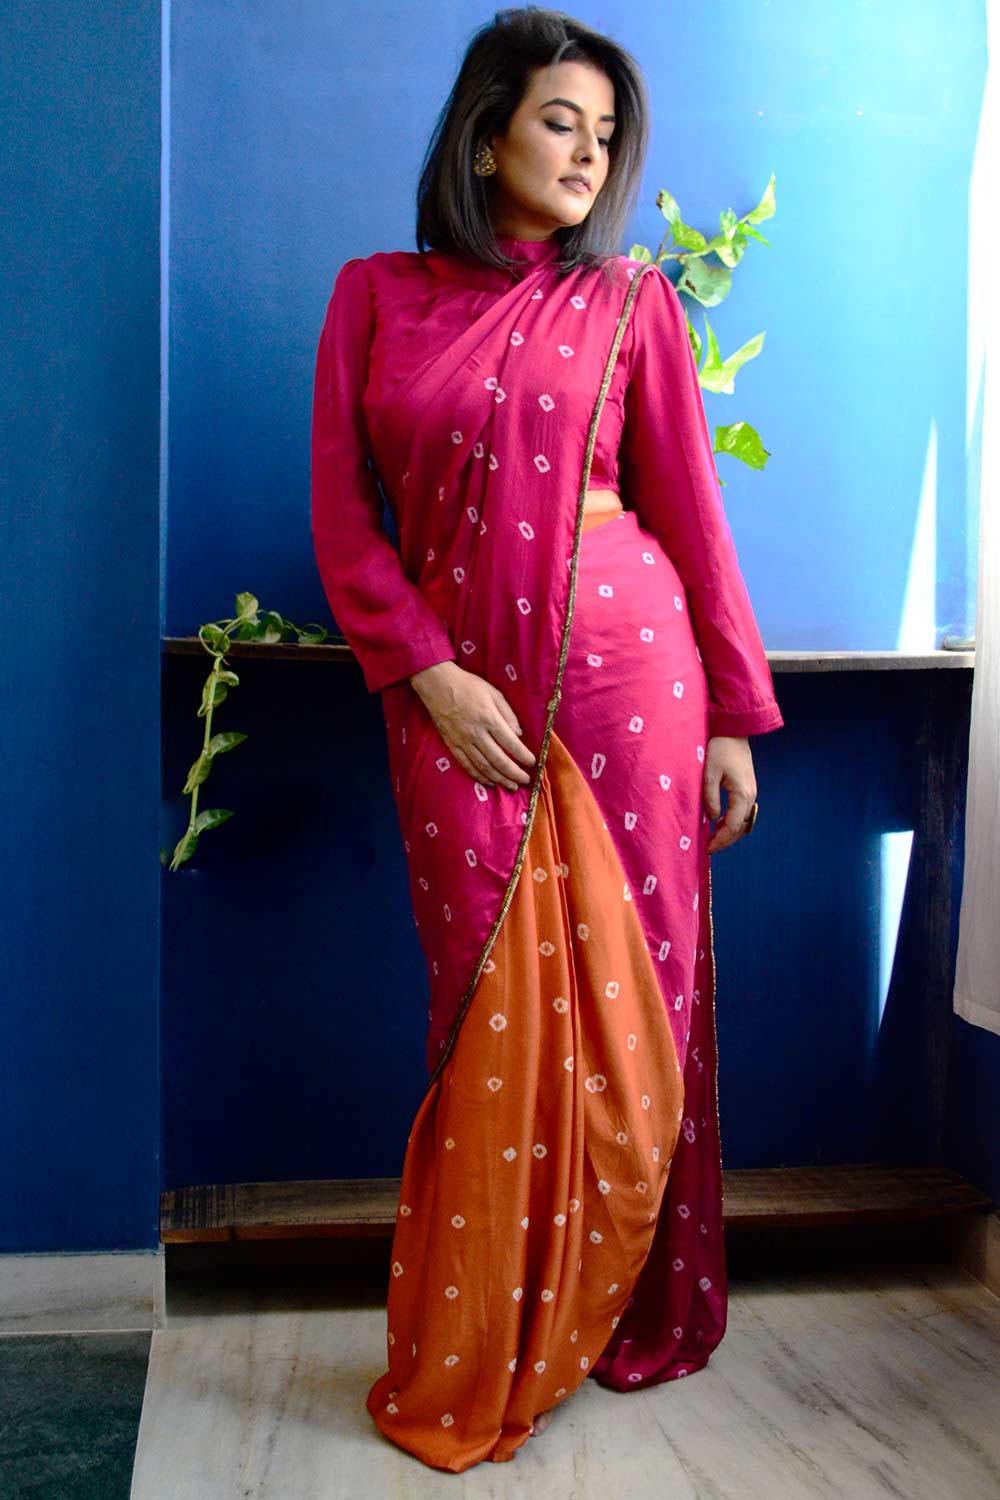 Bandhej Two Colour Pre Drape Saree With High Neck Top or Block Printed Blouse